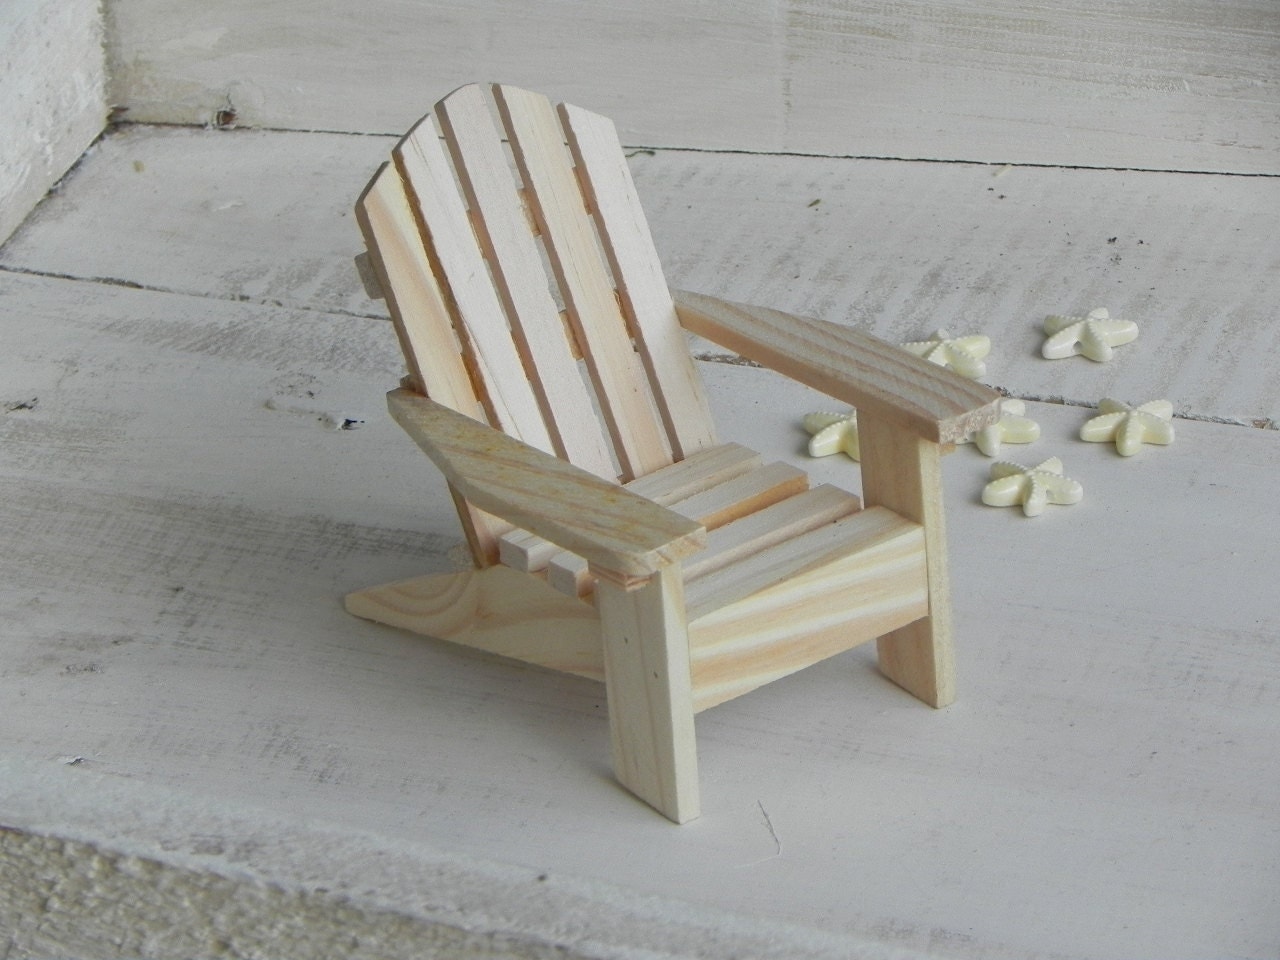 Adirondack Chair miniature ready to paint wood supplies ...